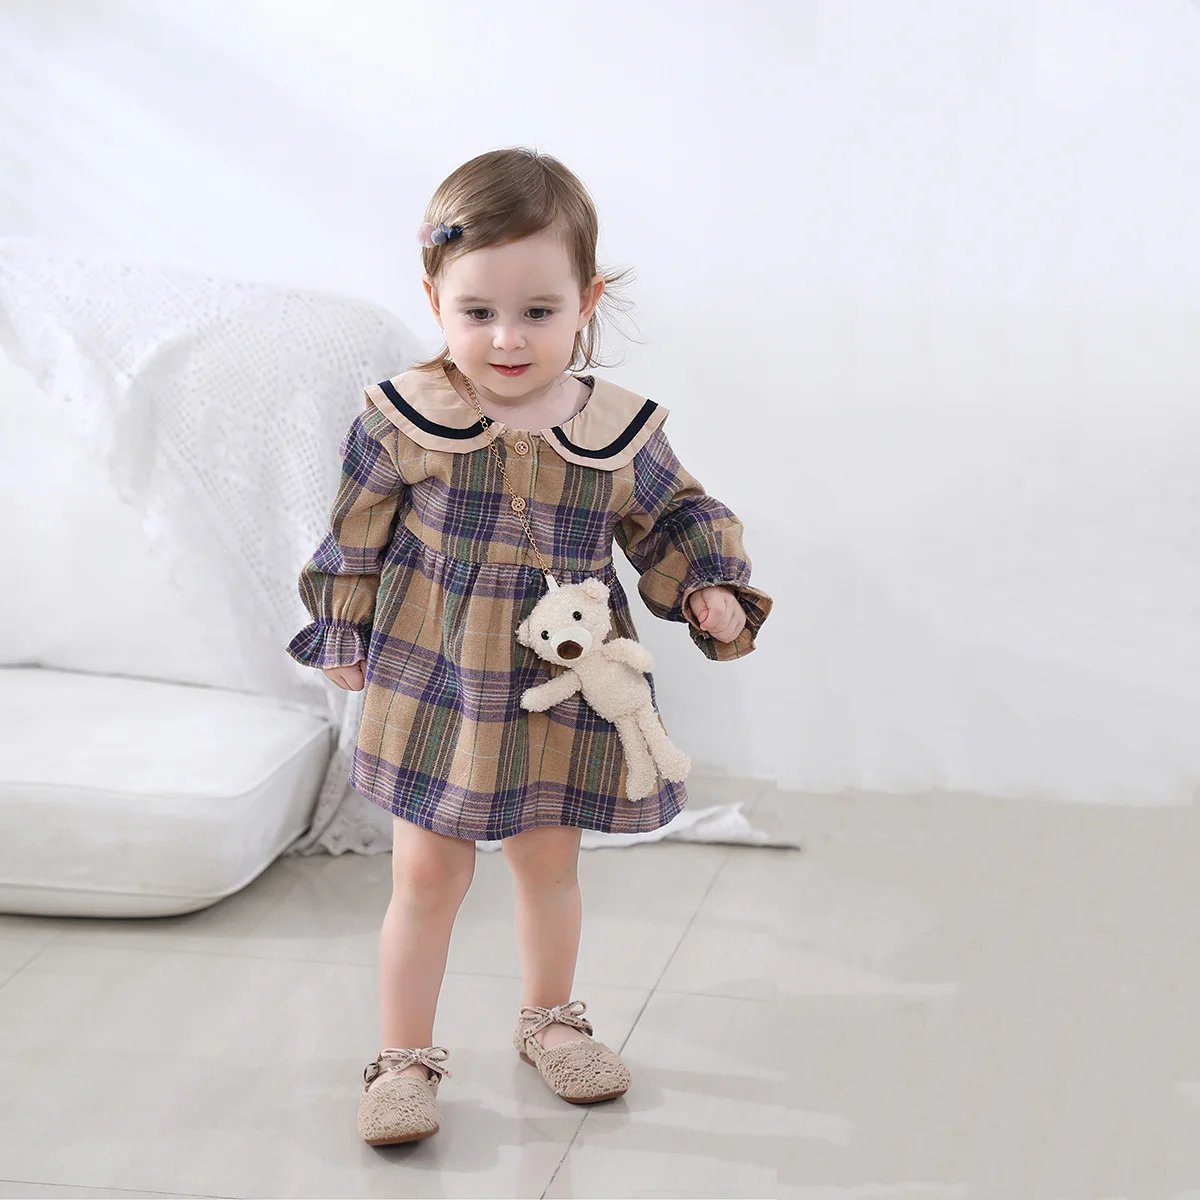 Pink Spliced Collar Baby Dress For Baby Girls Long Sleeve Suspender With  Long Sleeves Suitable For 6 3 Year Olds From Fengxiziwu, $14.41 | DHgate.Com